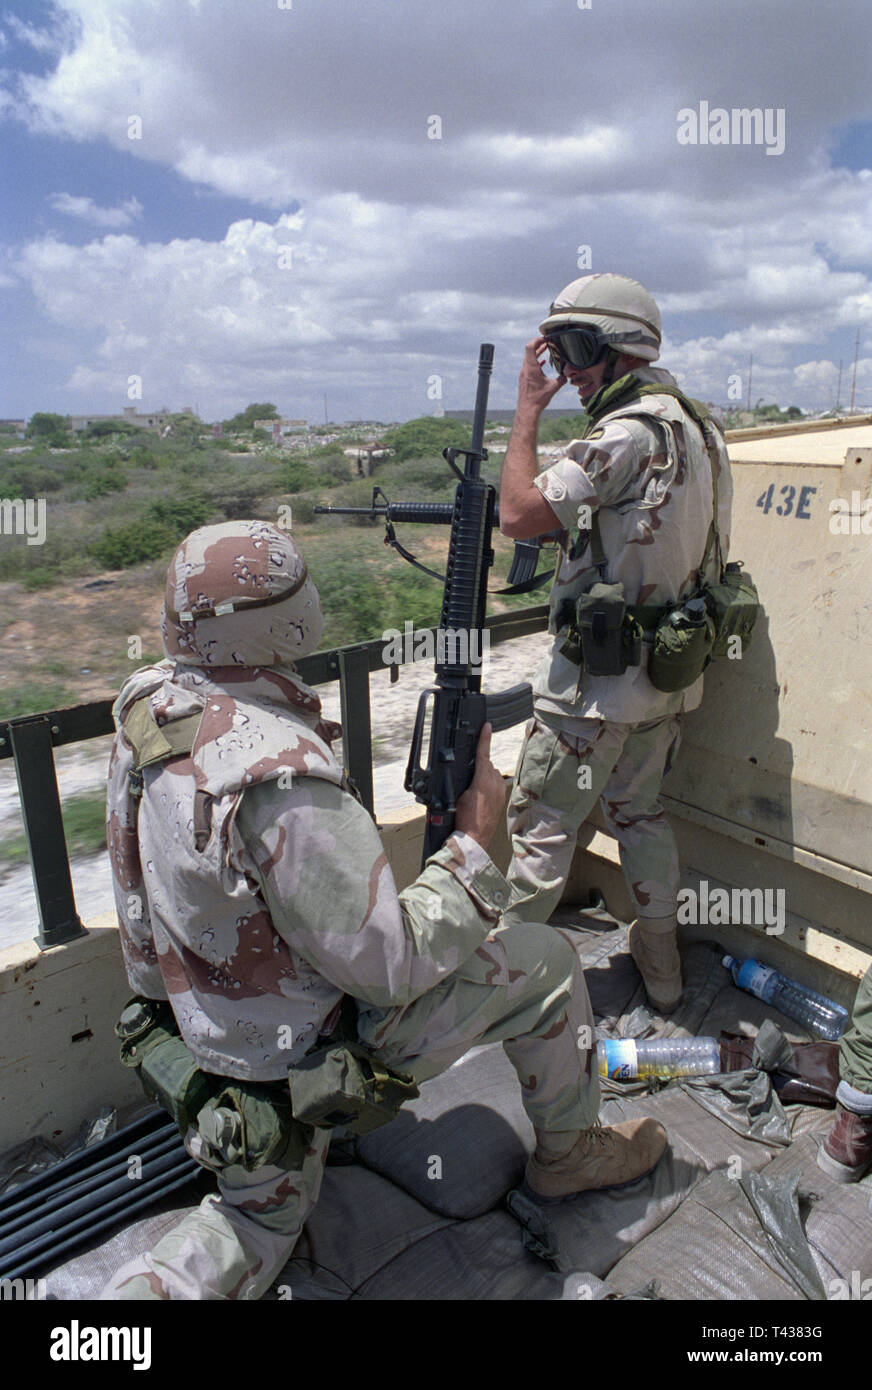 31st October 1993 U.S. Army soldiers from the USA Forces Command ride in the back of a truck on the way to 'Victory Base' on the northern outskirts of Mogadishu, Somalia. Stock Photo